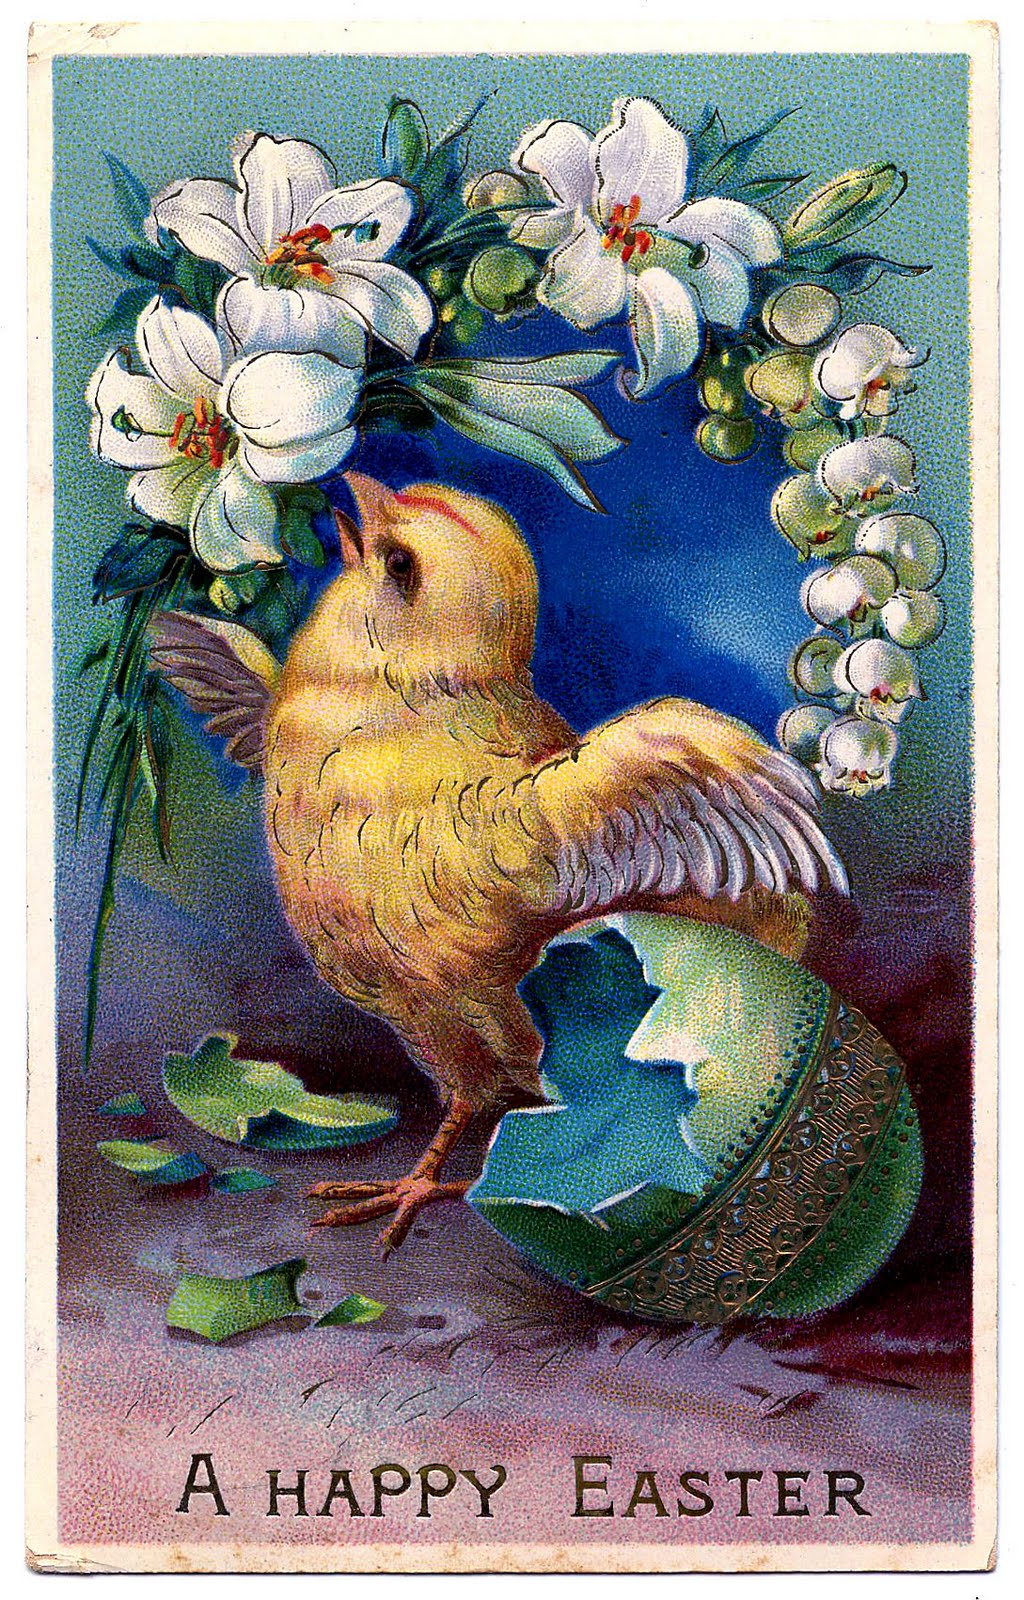 Vintage Easter Clip Art - Sweet Baby Chick With Egg - The Graphics Fairy - Free Printable Vintage Easter Images